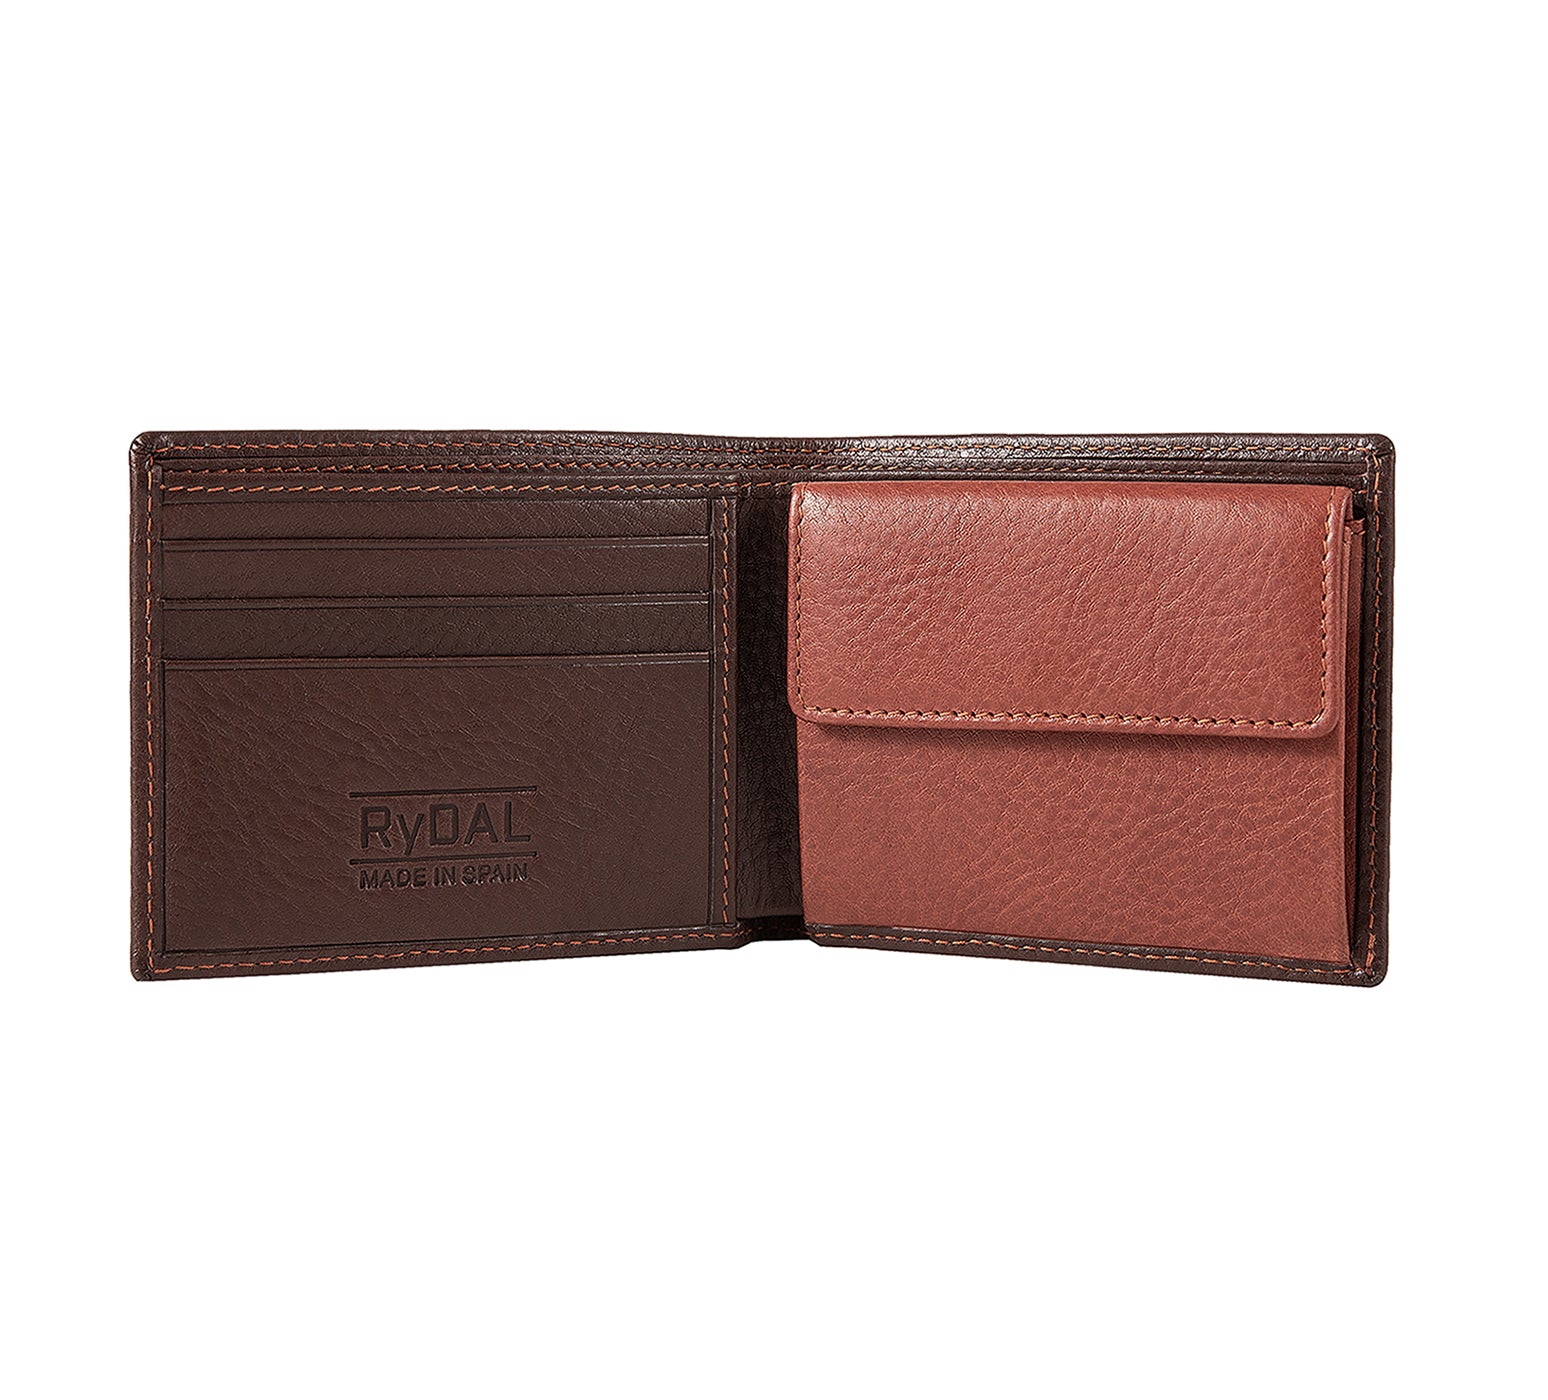 Mens Leather Wallet with Coin Pocket from Rydal in 'Dark Brown/Rust' showing interior.